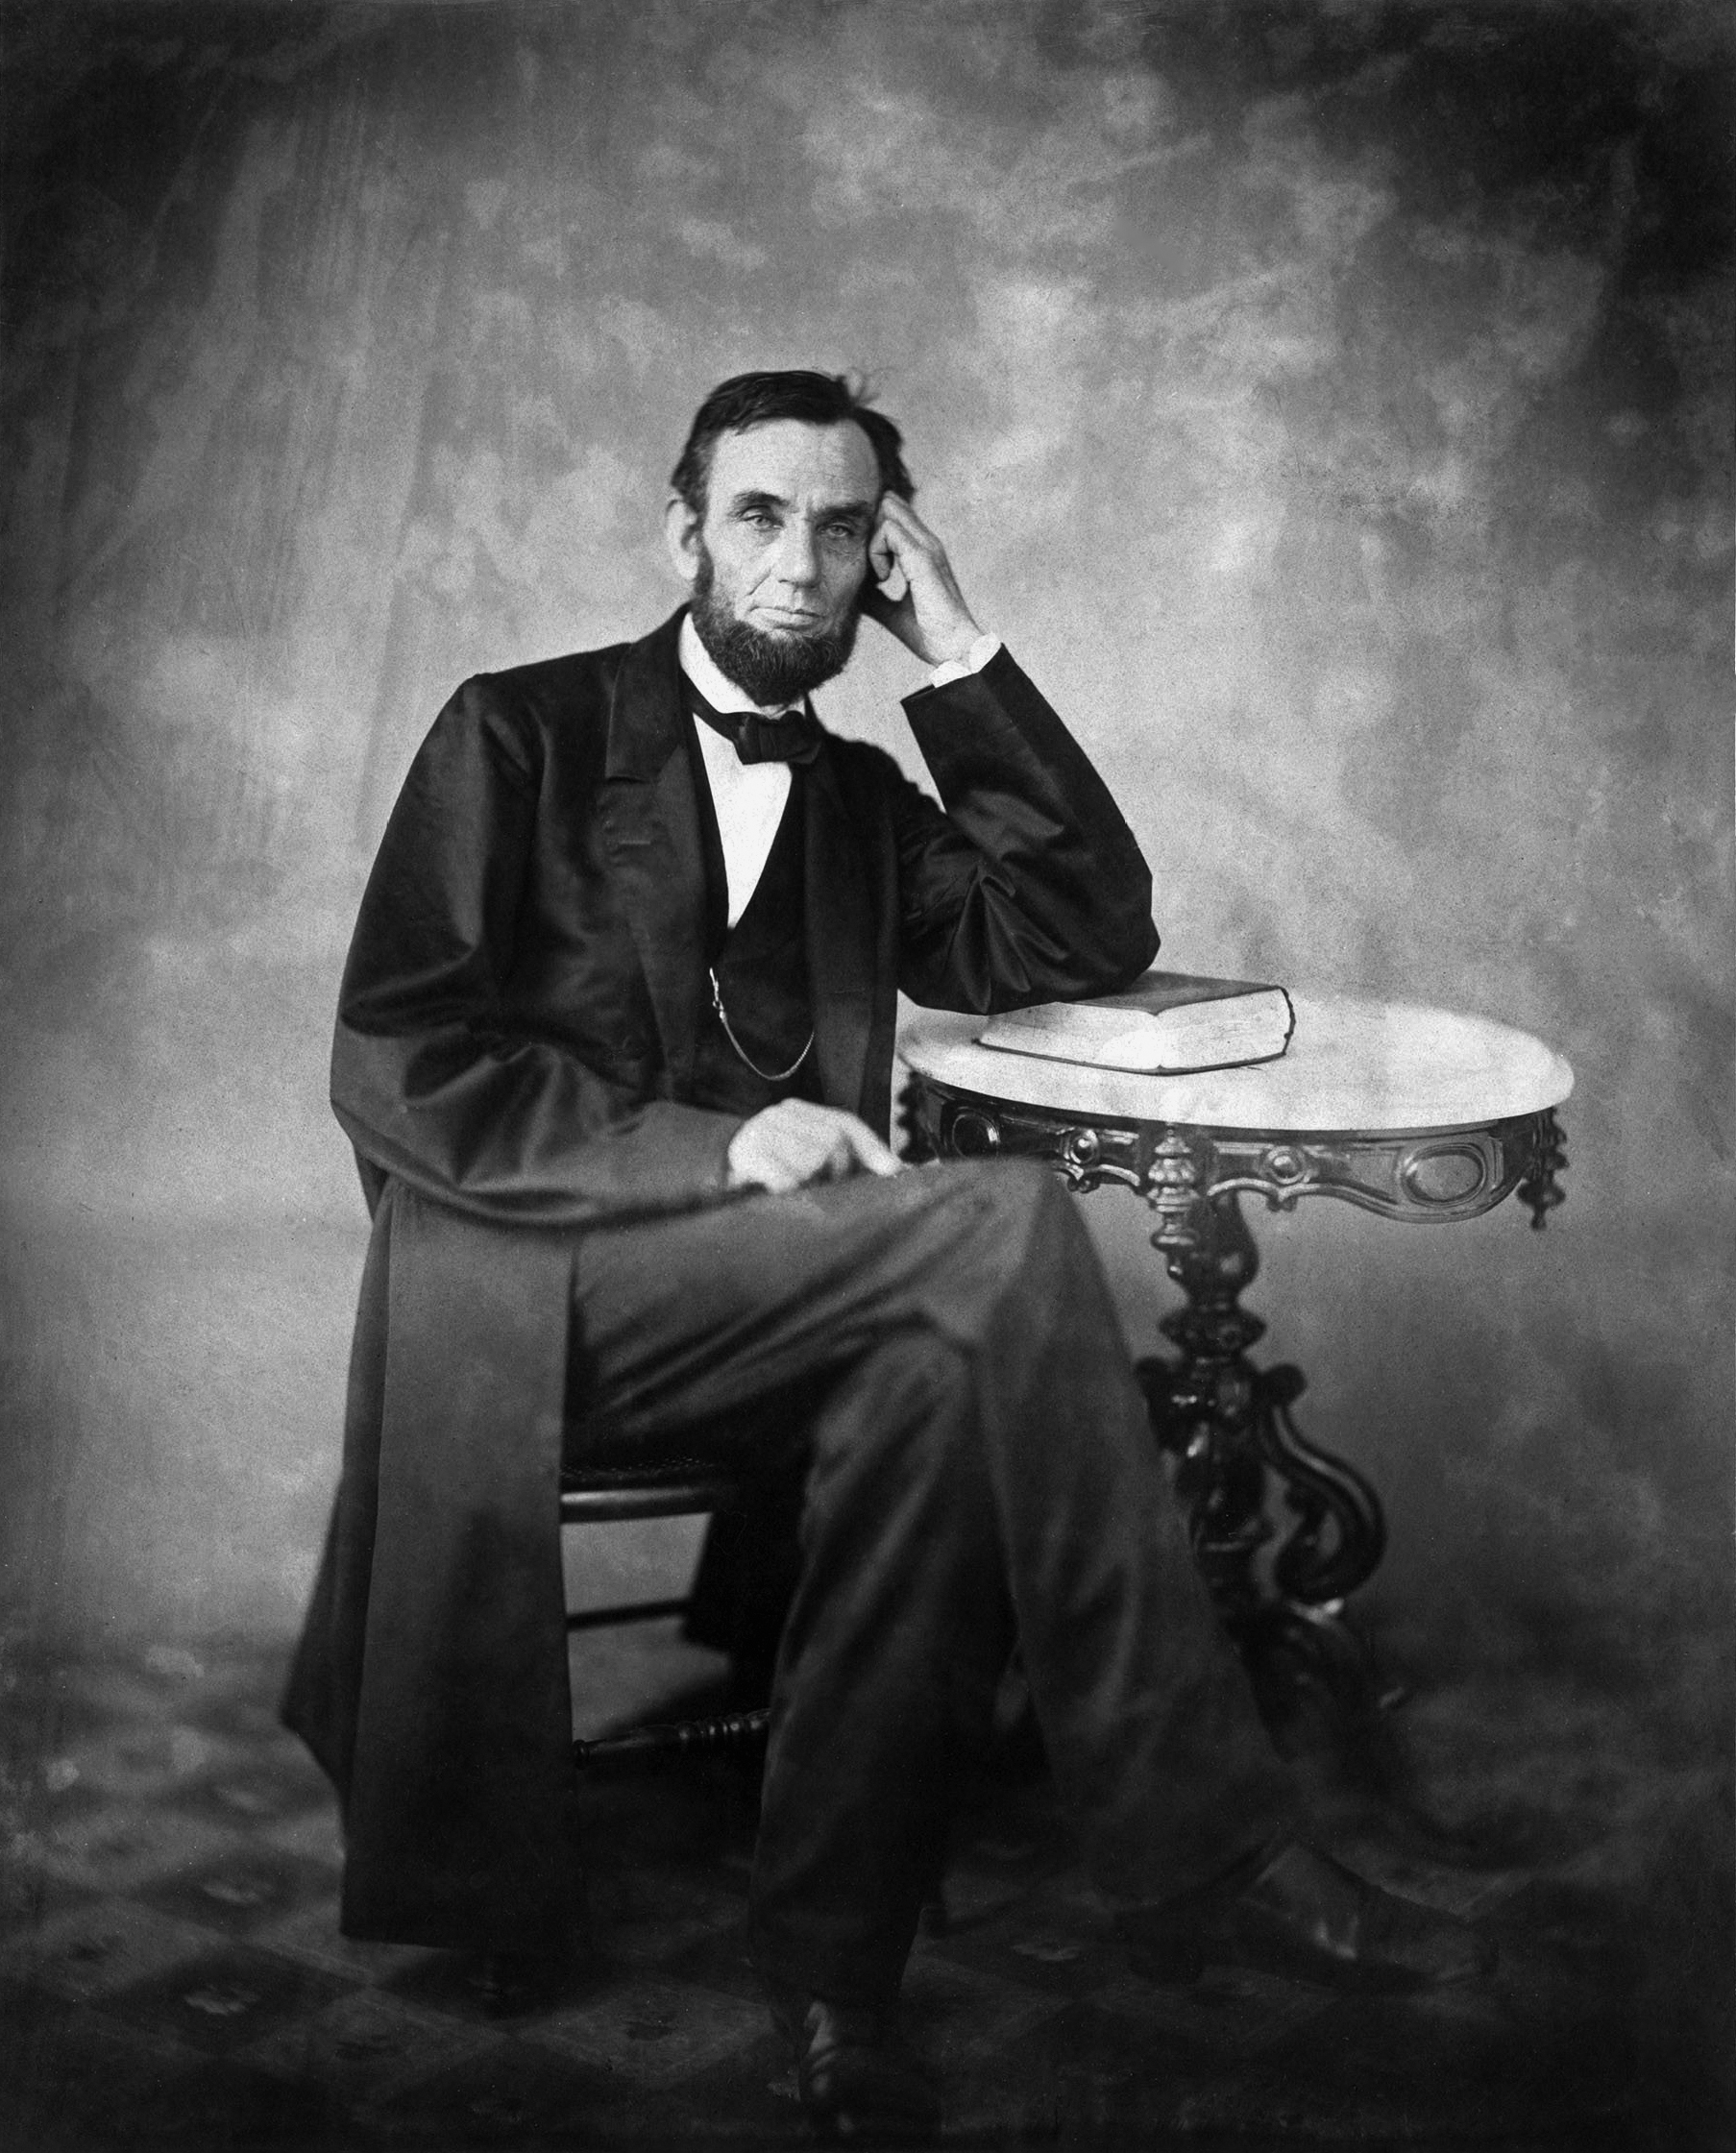 Details about   New Civil War Photo Seated President Abraham Lincoln in 1863-6 Sizes! 